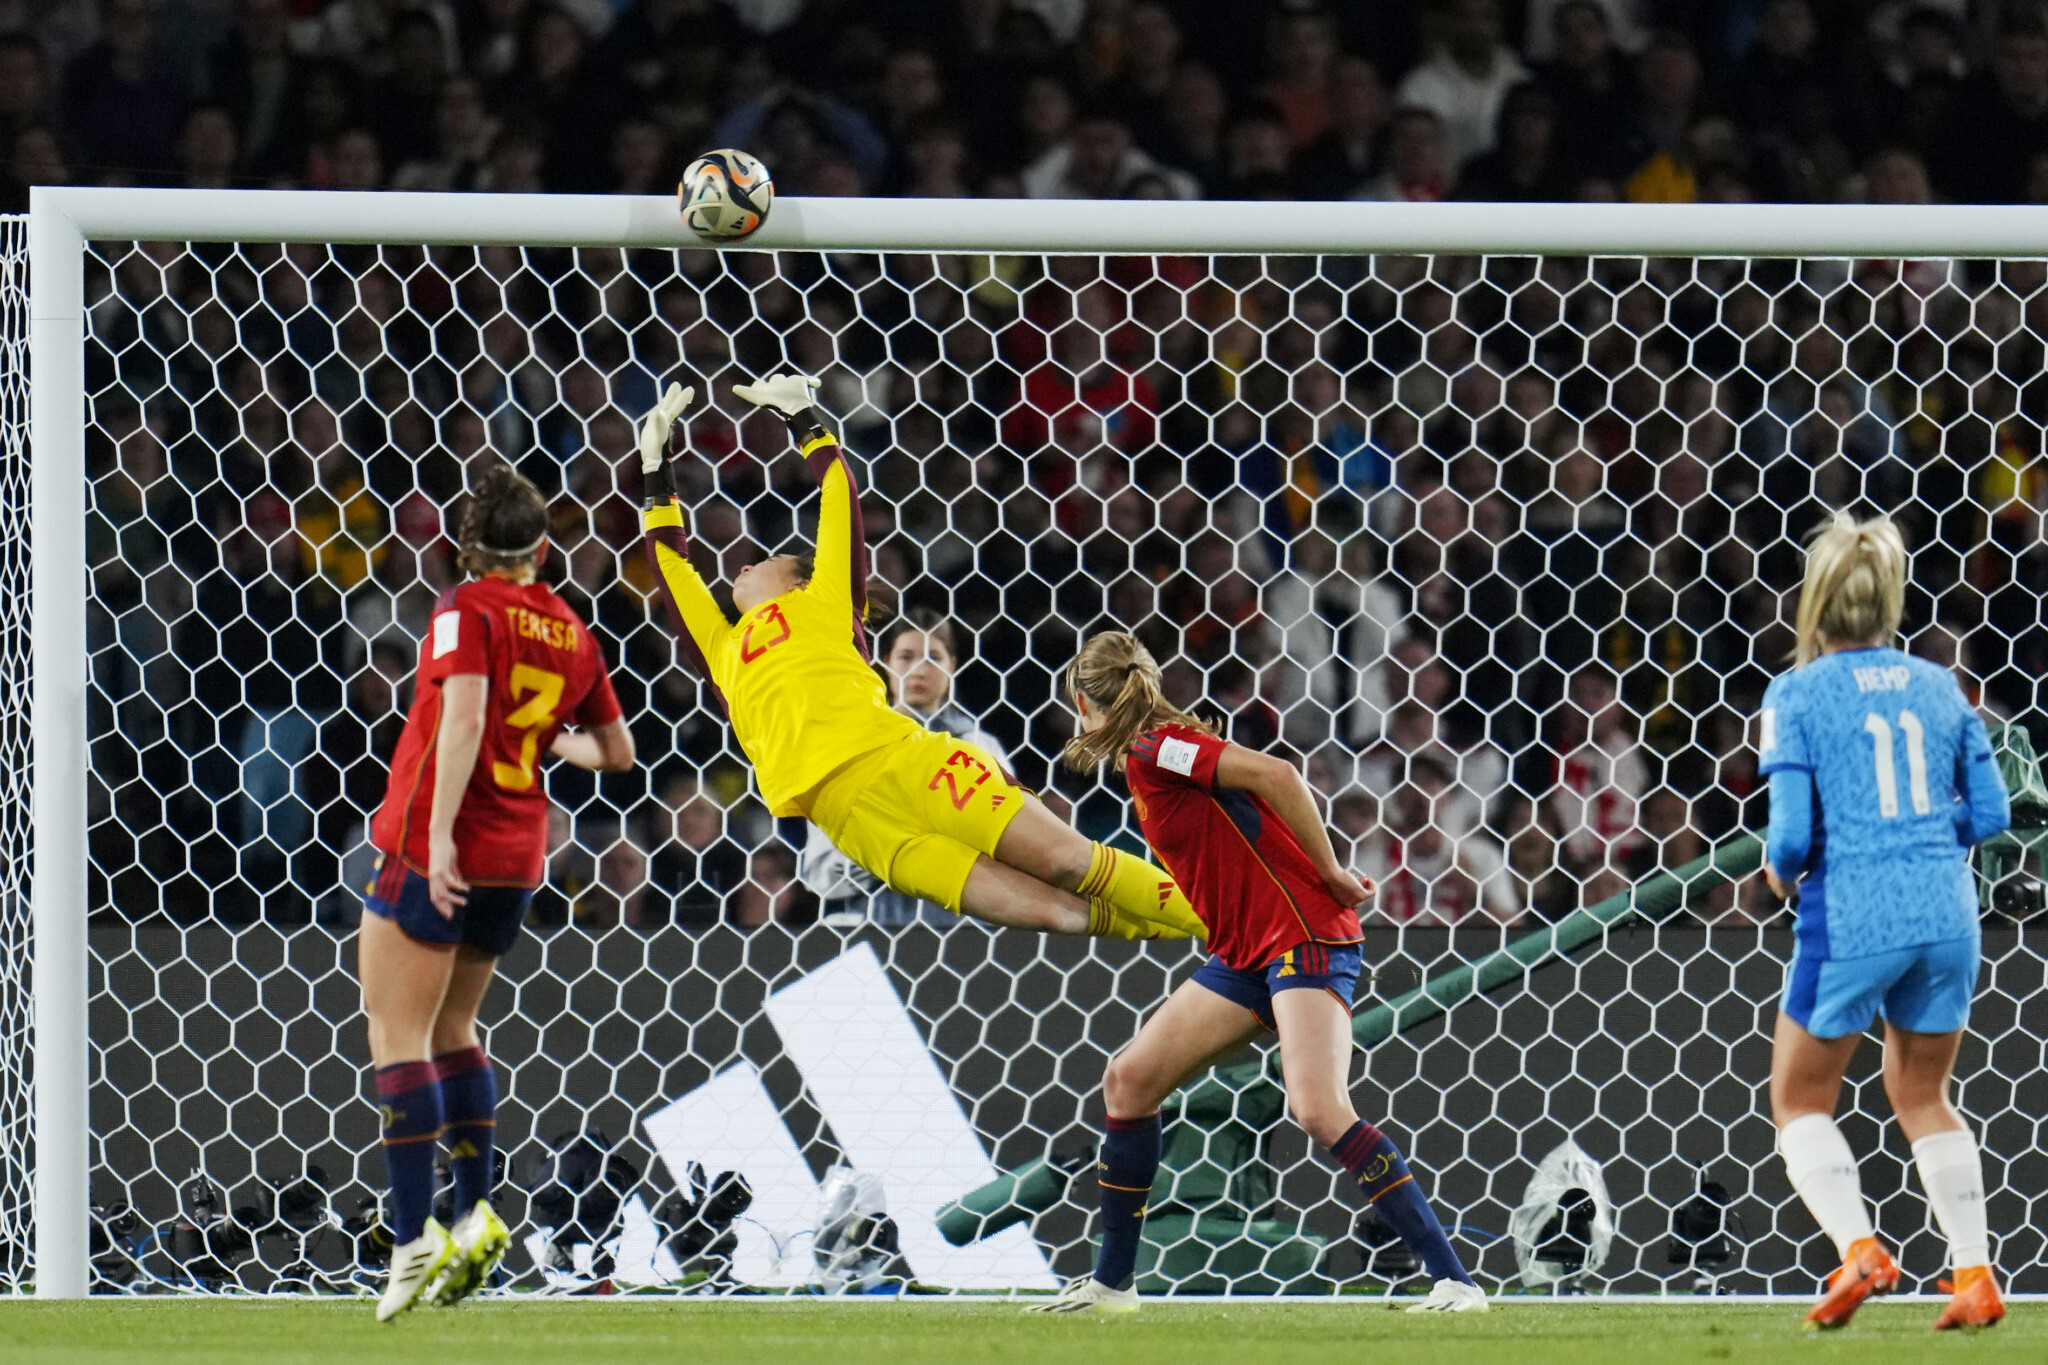 Women's World Cup Final: Spain Beats England to Win Its First World Cup -  The New York Times